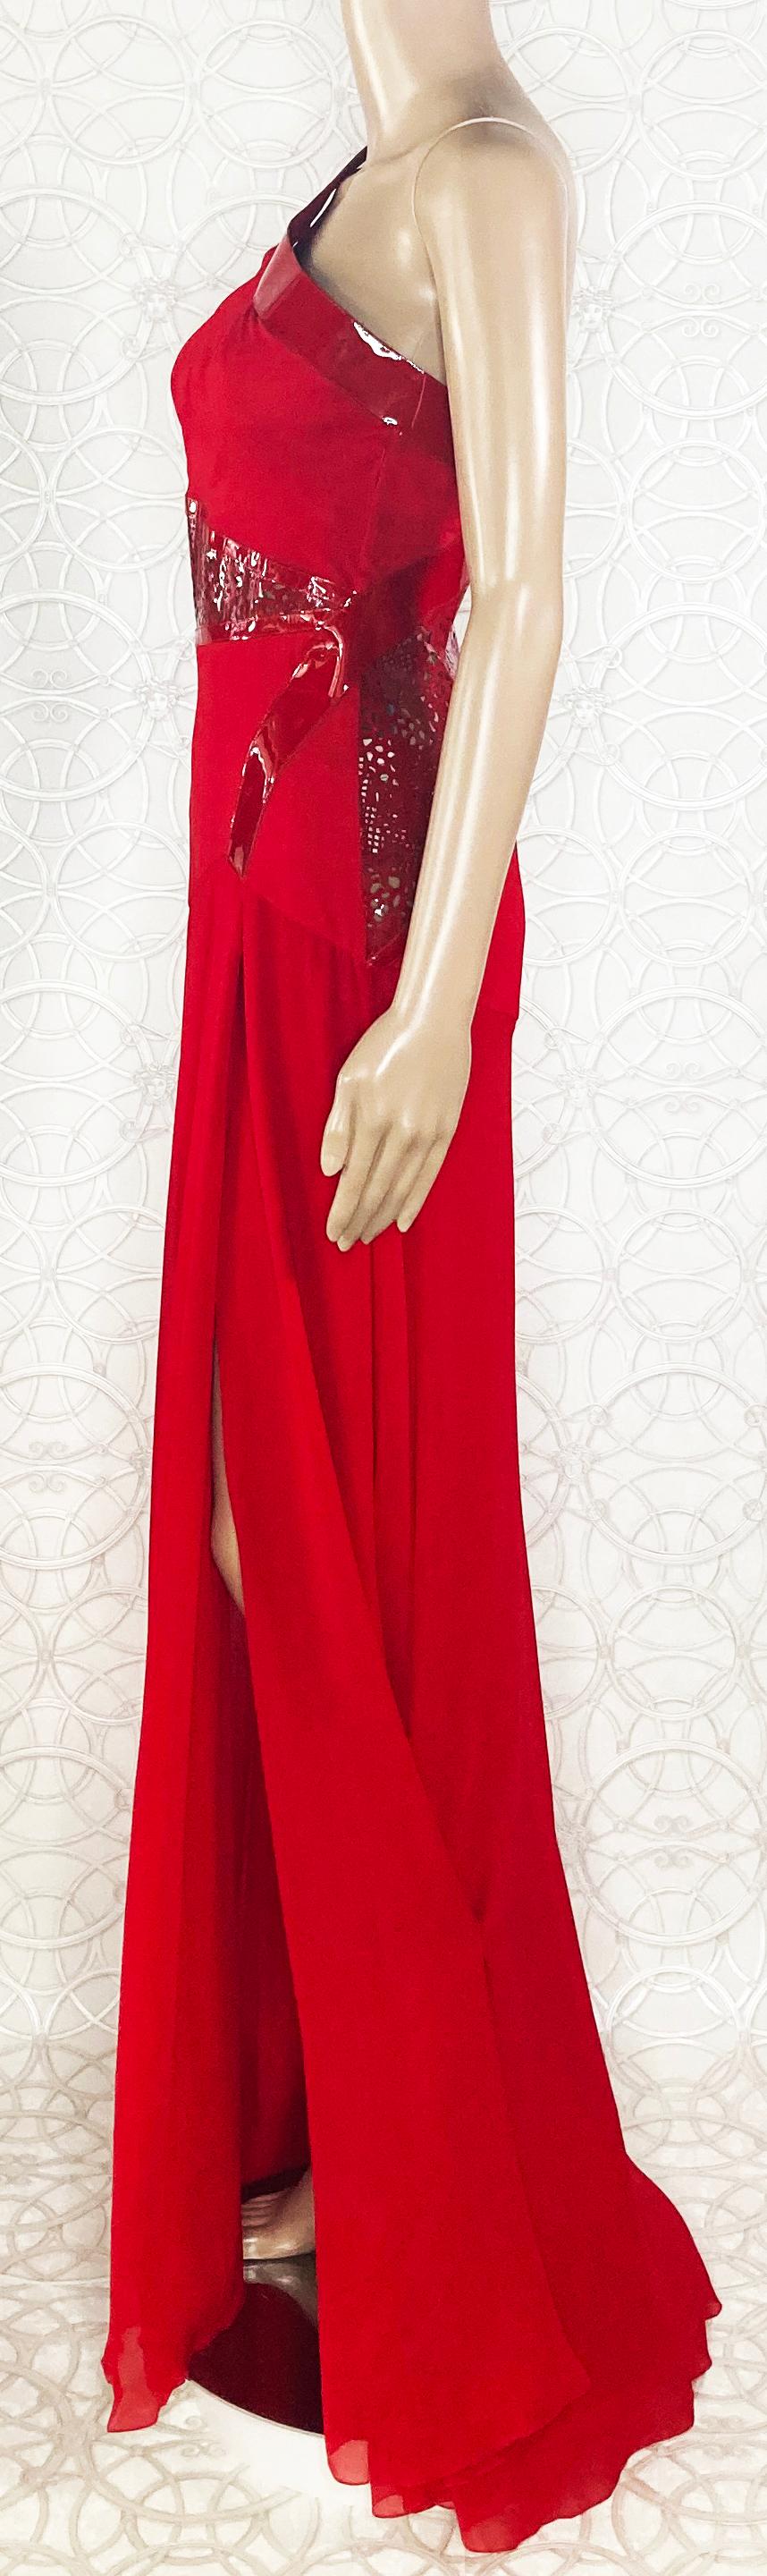 VERSACE RED SILK EVENING LONG GOWN DRESS w/PATENT LEATHER INSERTS 38 -2 For Sale 4